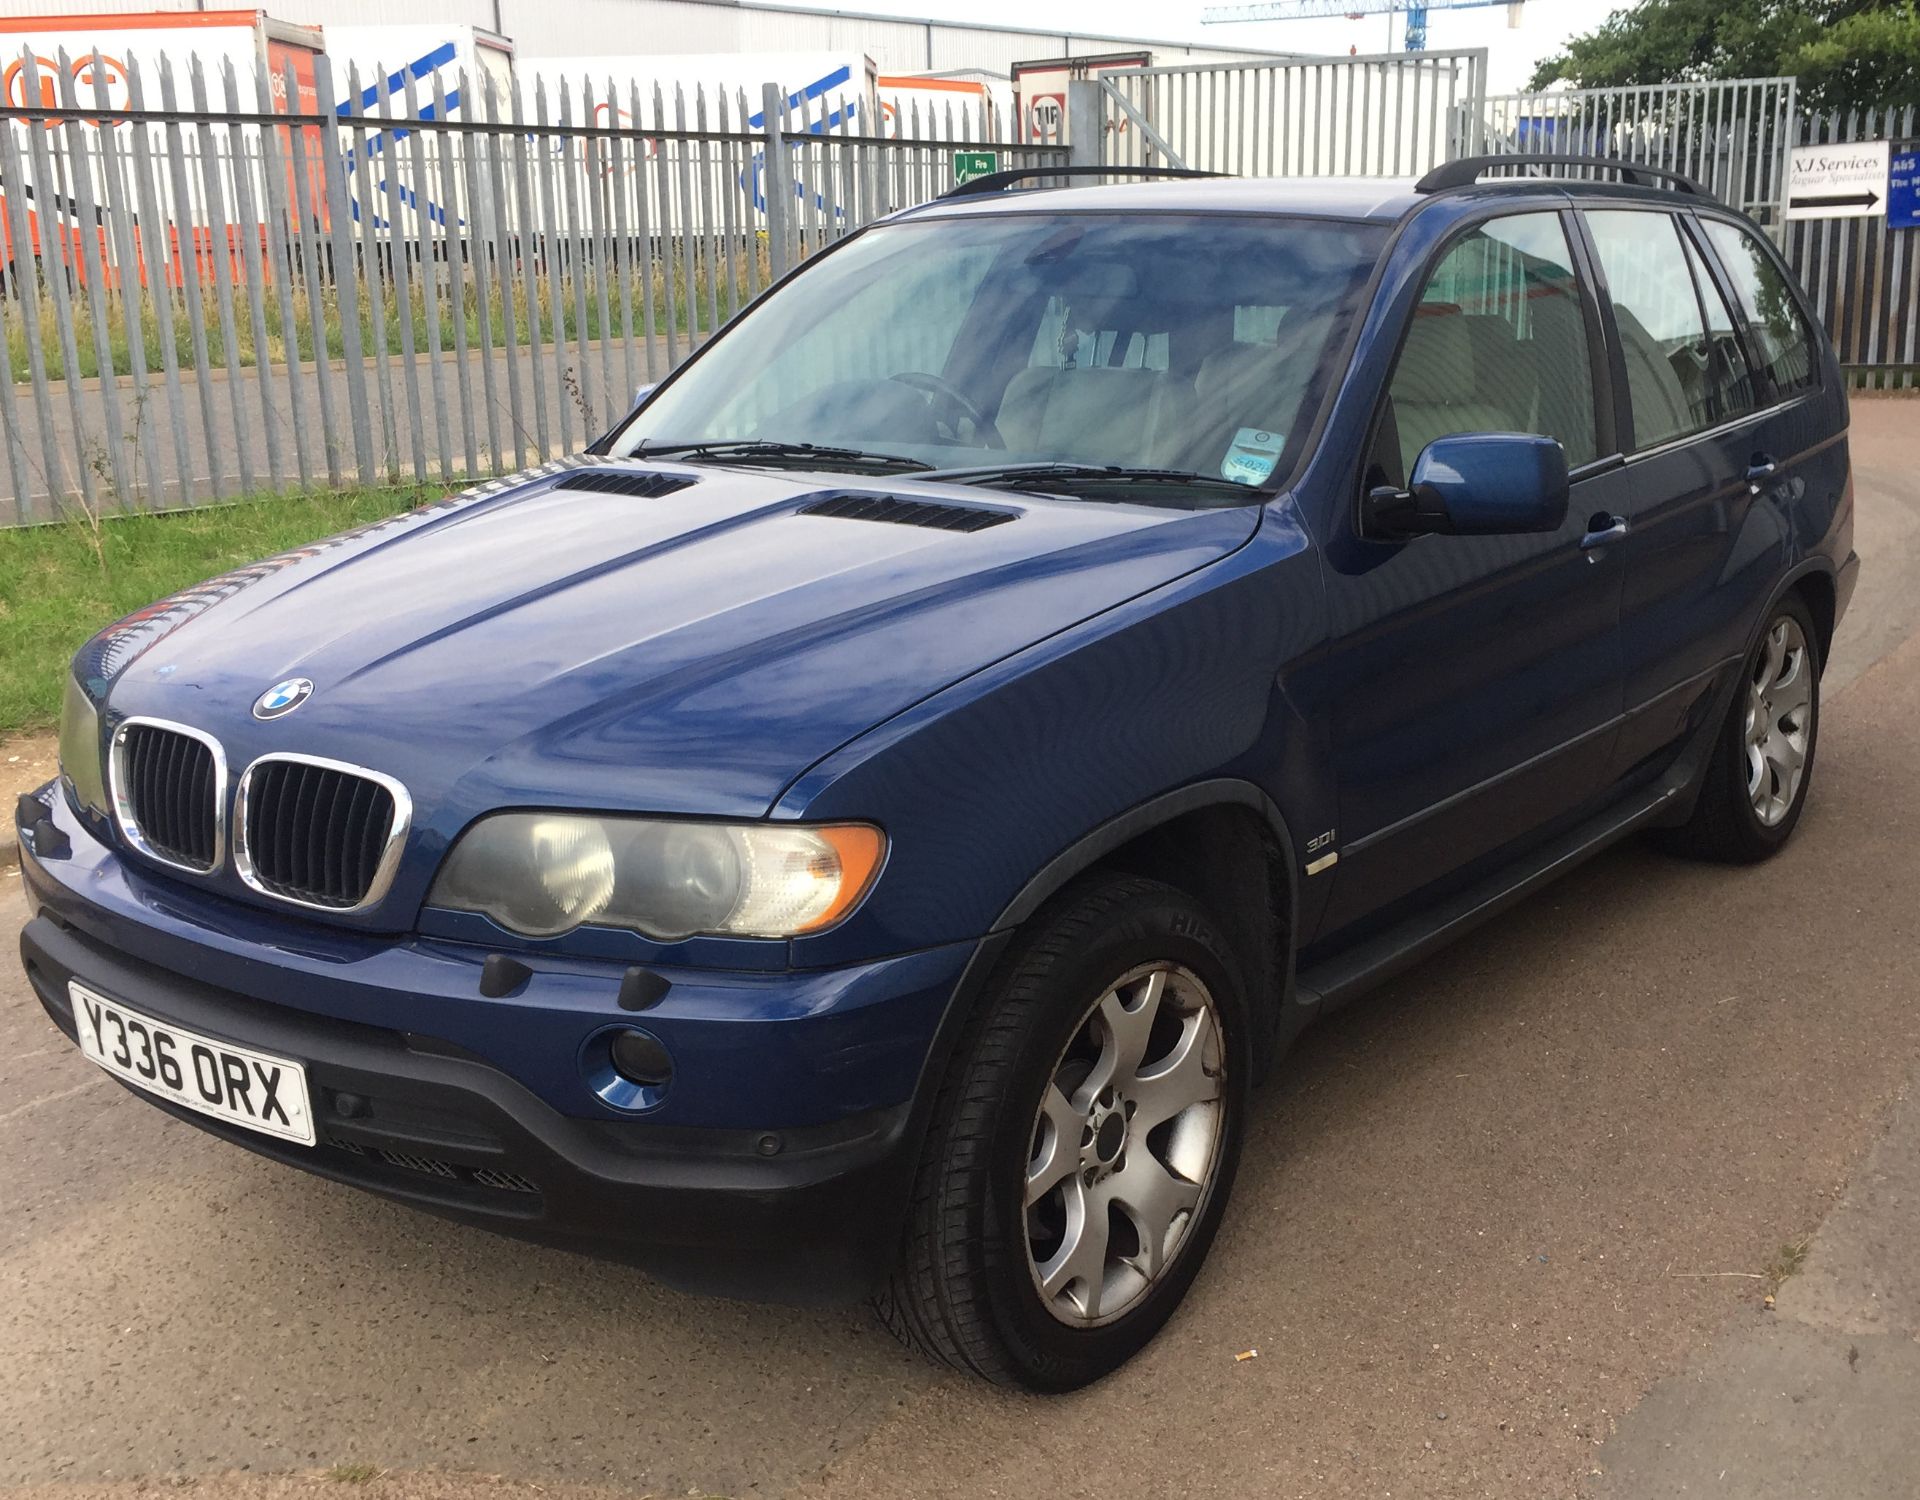 2001 BMW X5 3.0 Sport 5Dr 4x4 - CL505 - NO VAT ON THE HAMMER - Location: - Image 5 of 10